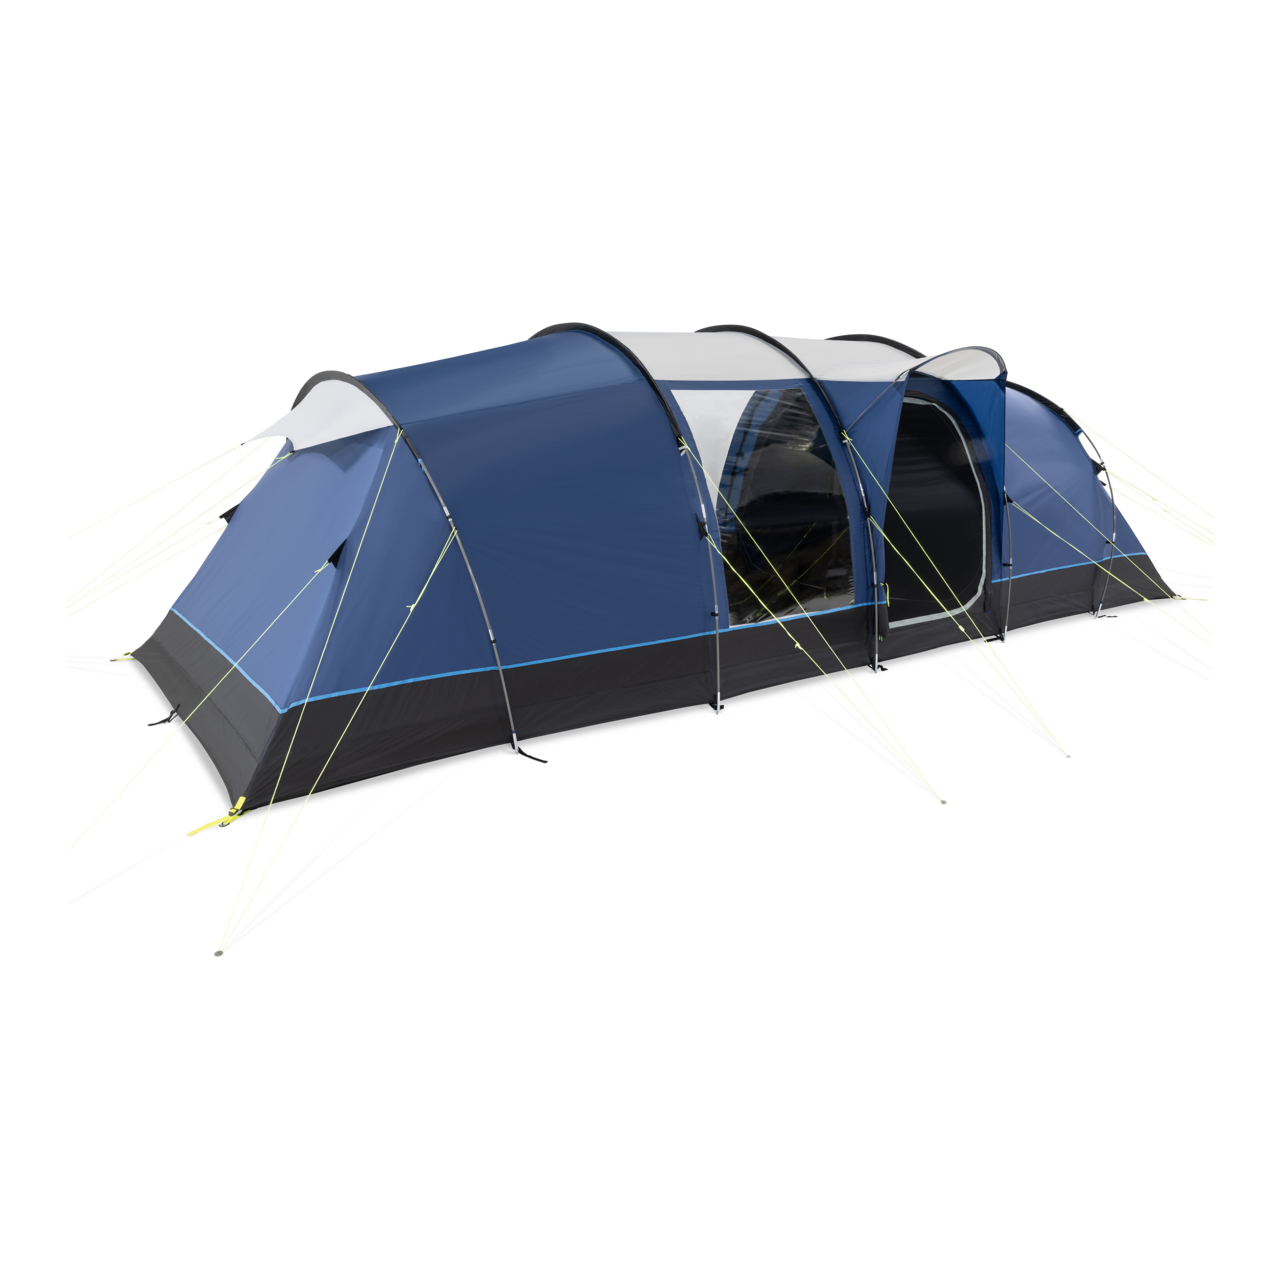 Kampa Watergate 8 - 8 person poled tent